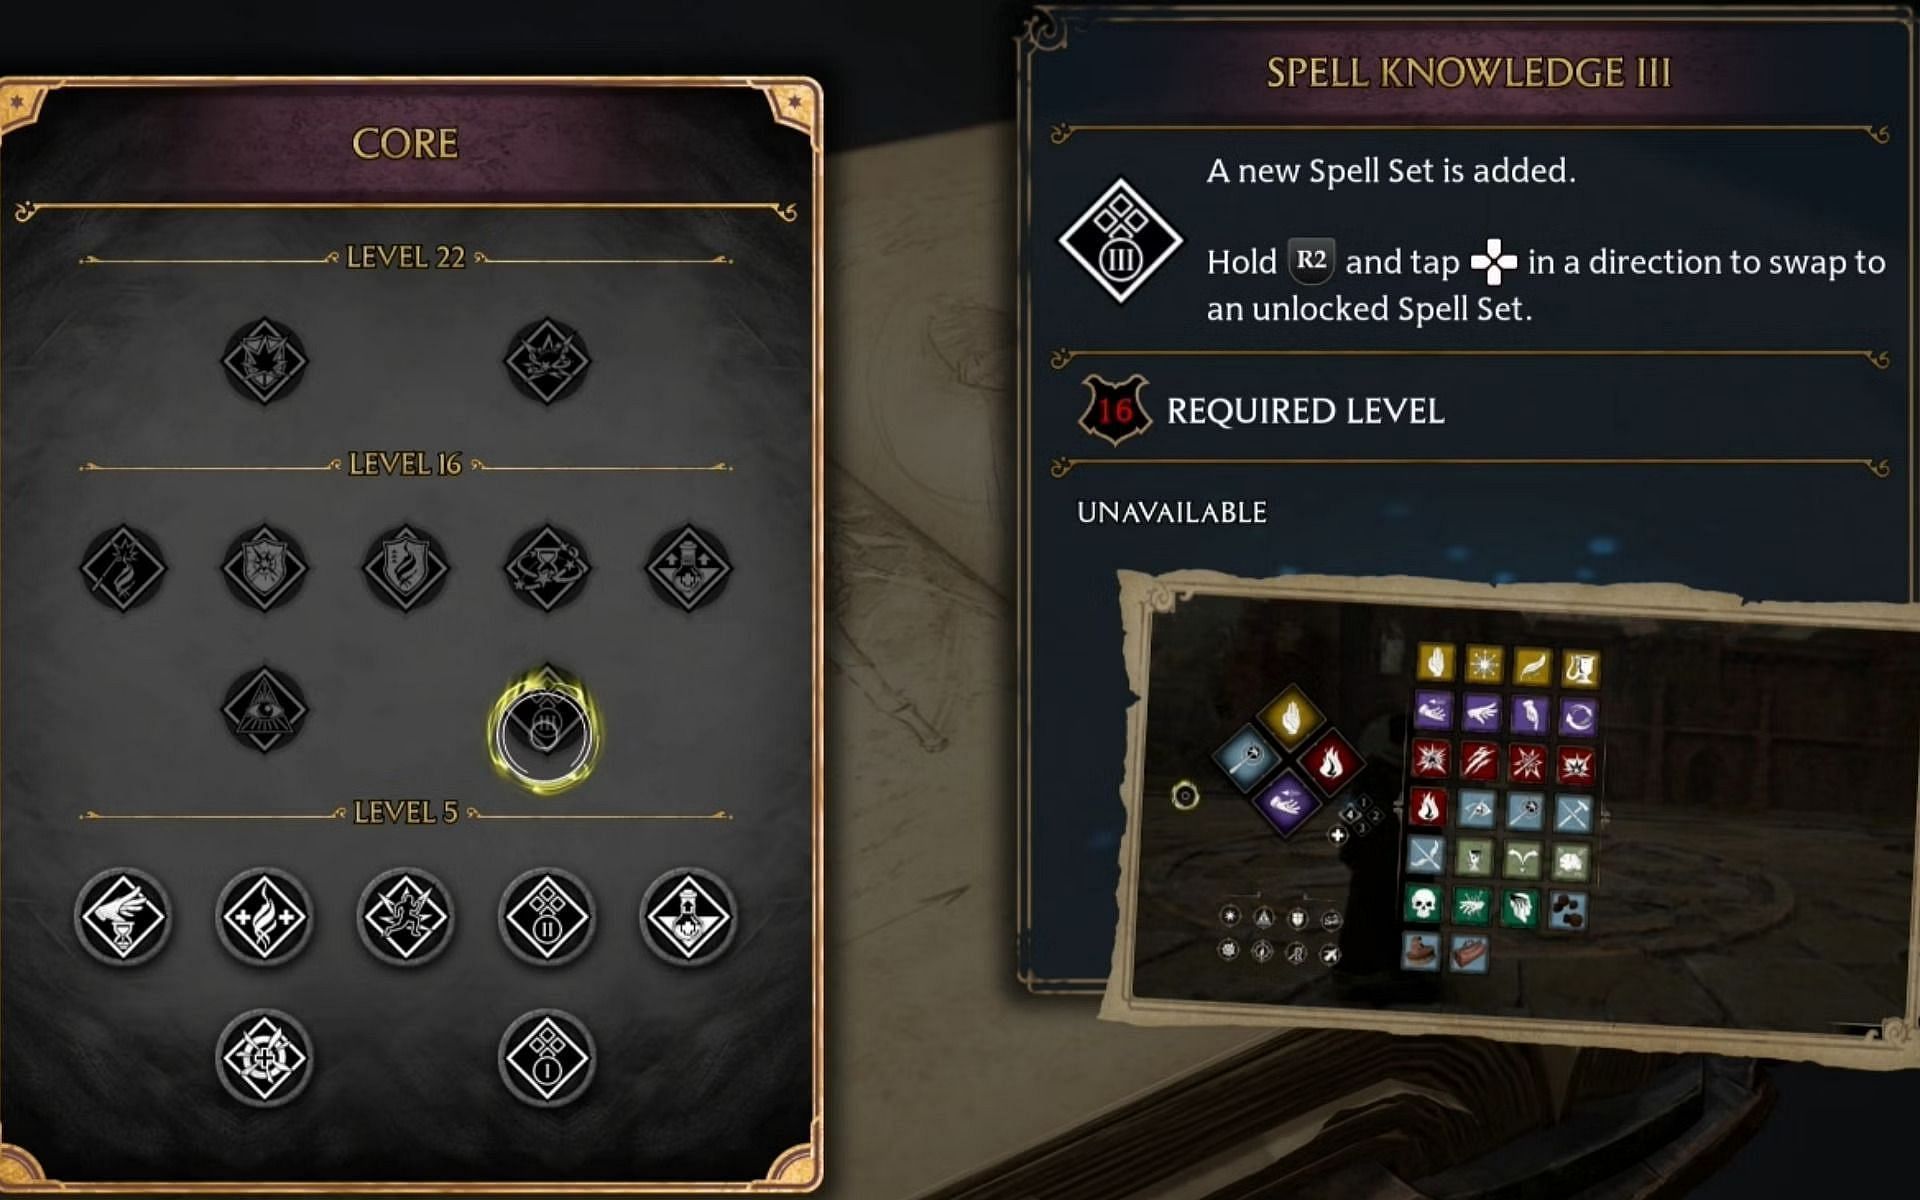 Spell Knowledge III enables players to have four spell sets (Image via WB Games)